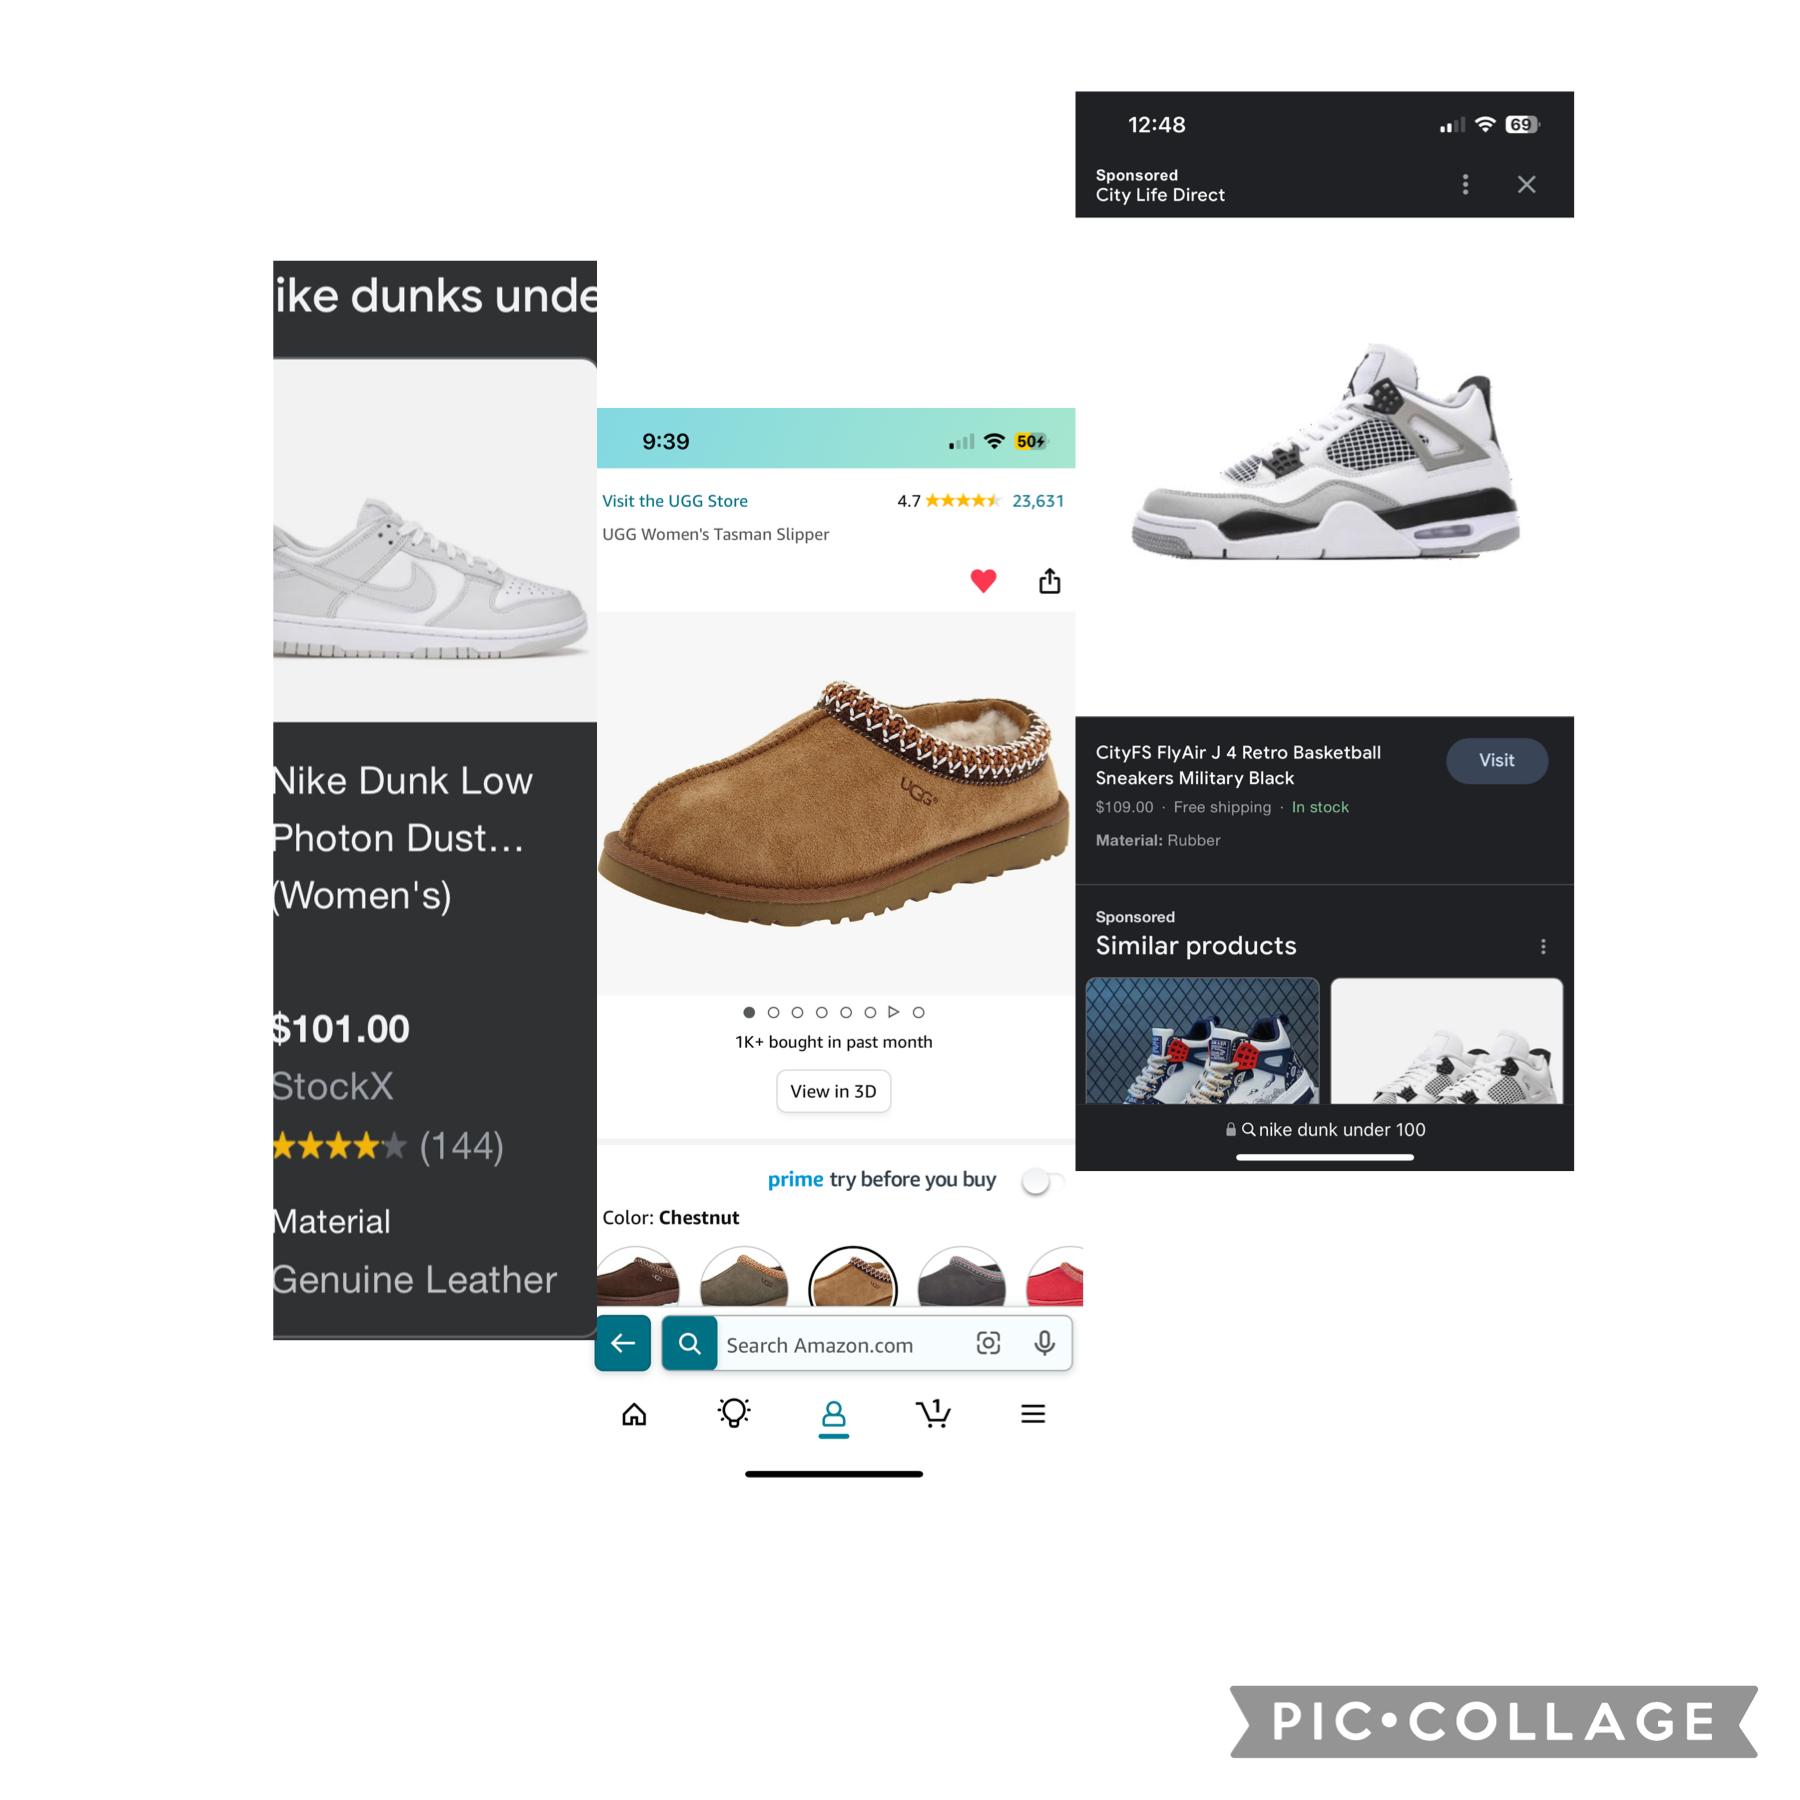 which shoe should i get?